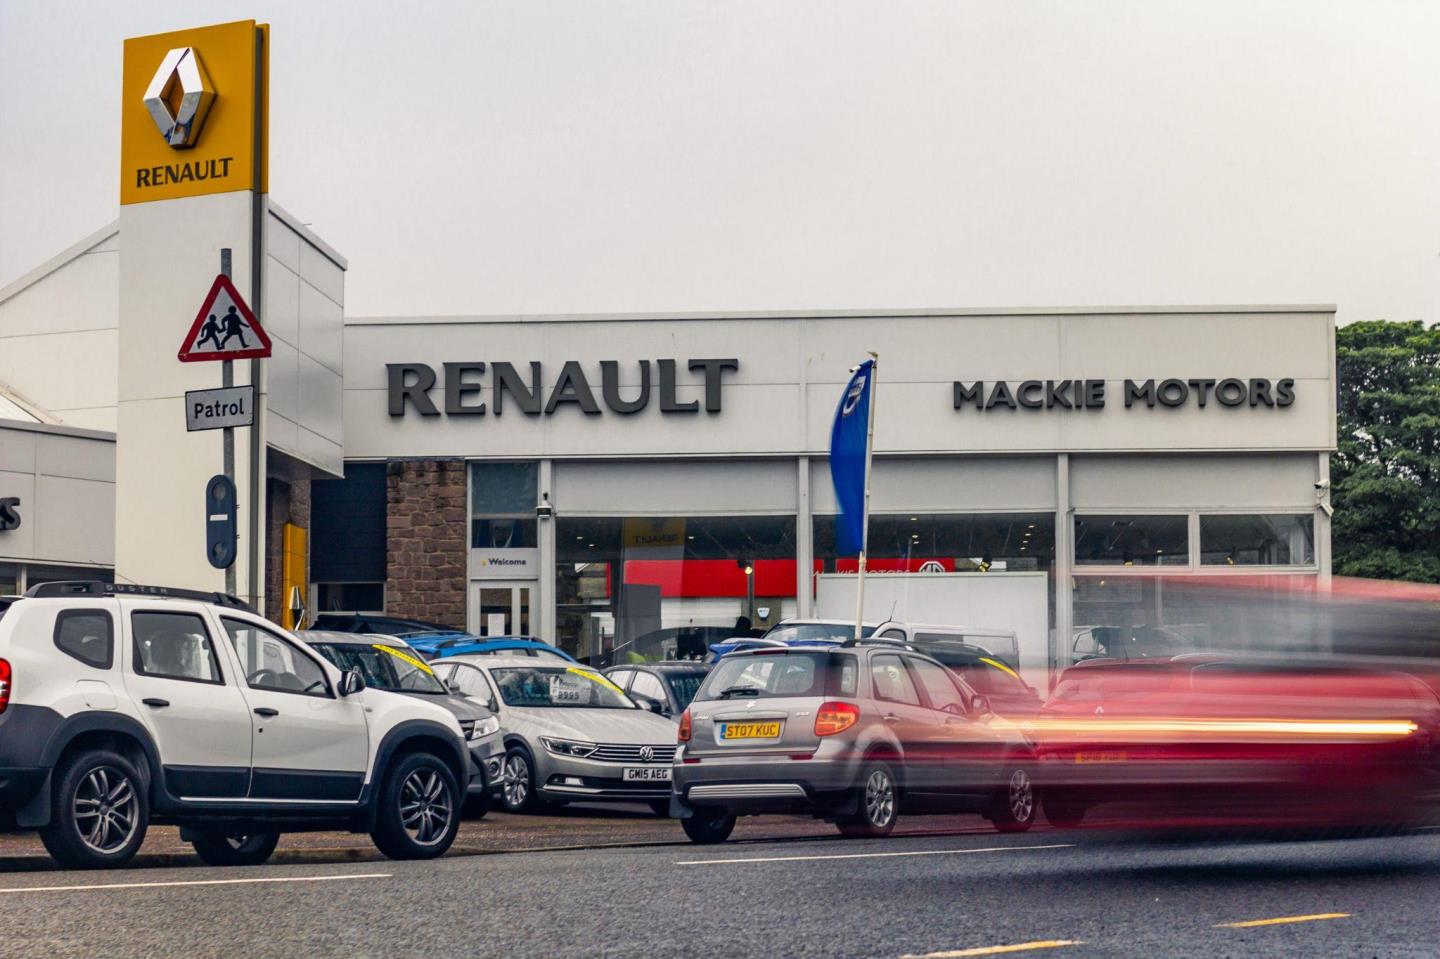 Mackie Motors, in Arbroath, Scotland, sell electric cars and answer questions